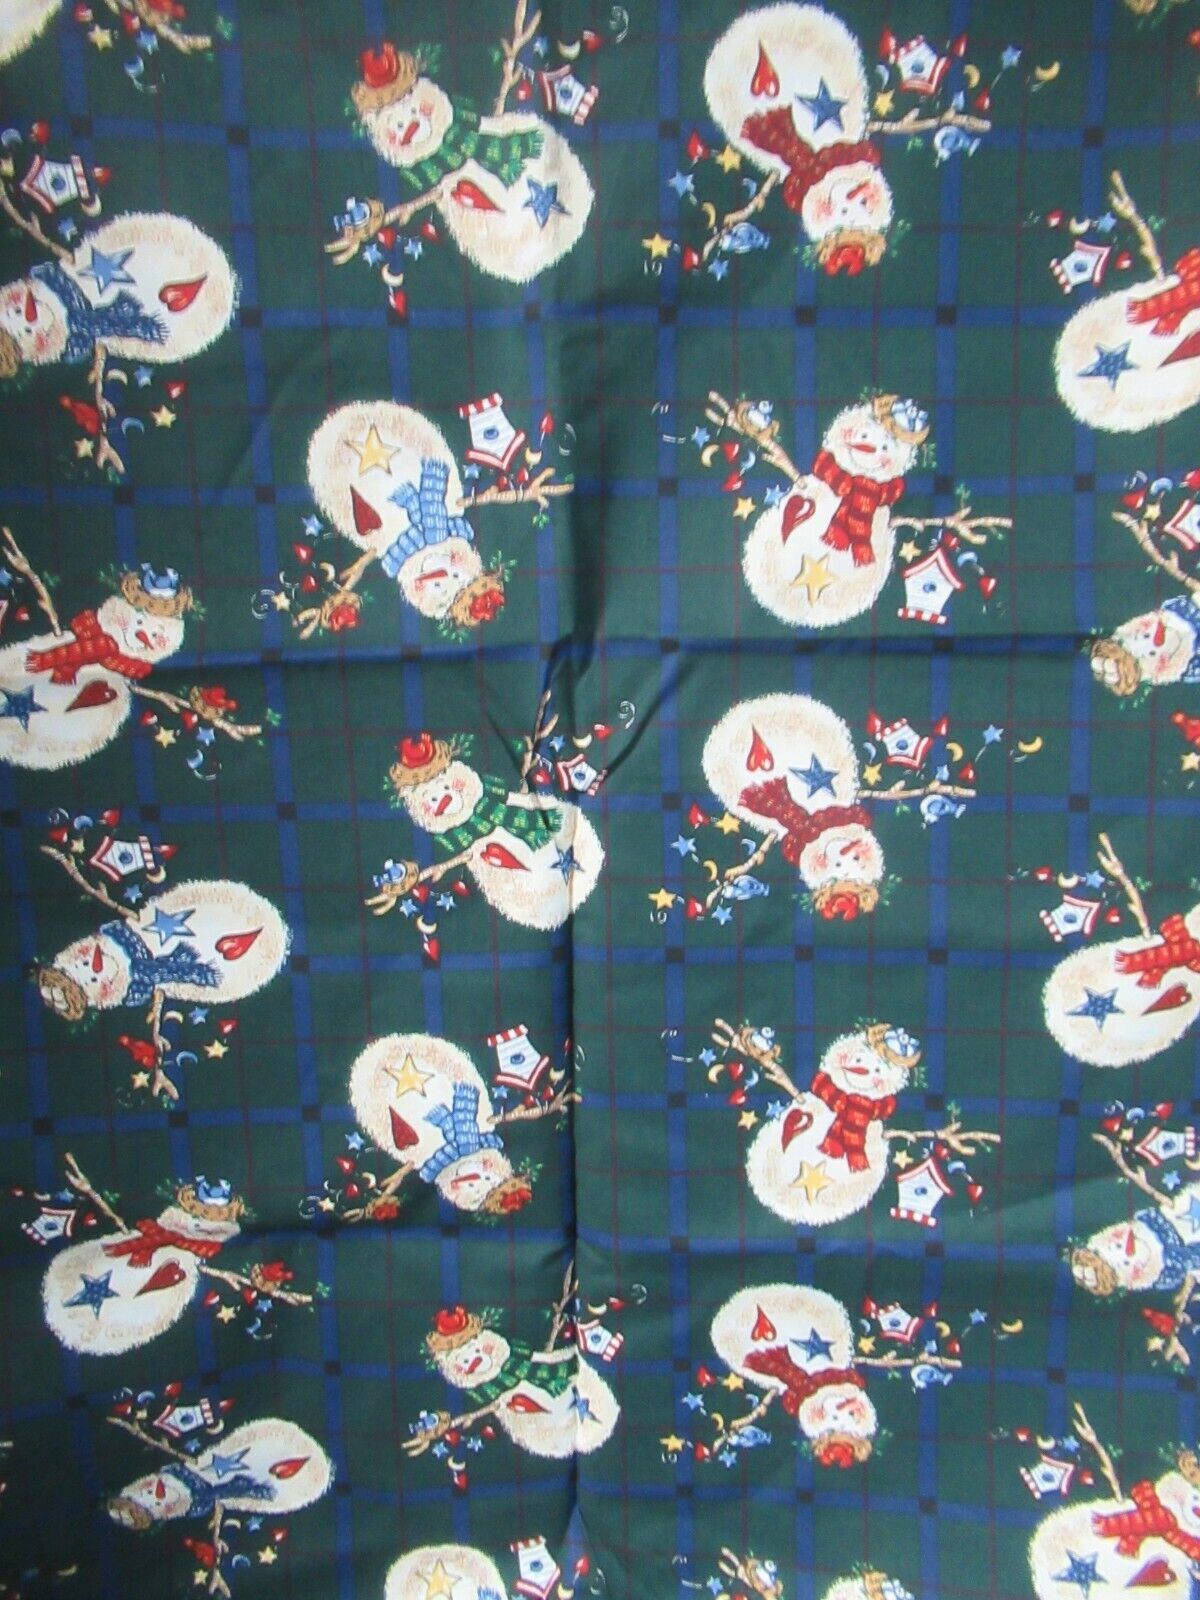 Vintage Ranking TOP19 Snowman W STICK ARMS BIRD HOUSES NEW FABRIC 1Y COTTON 44